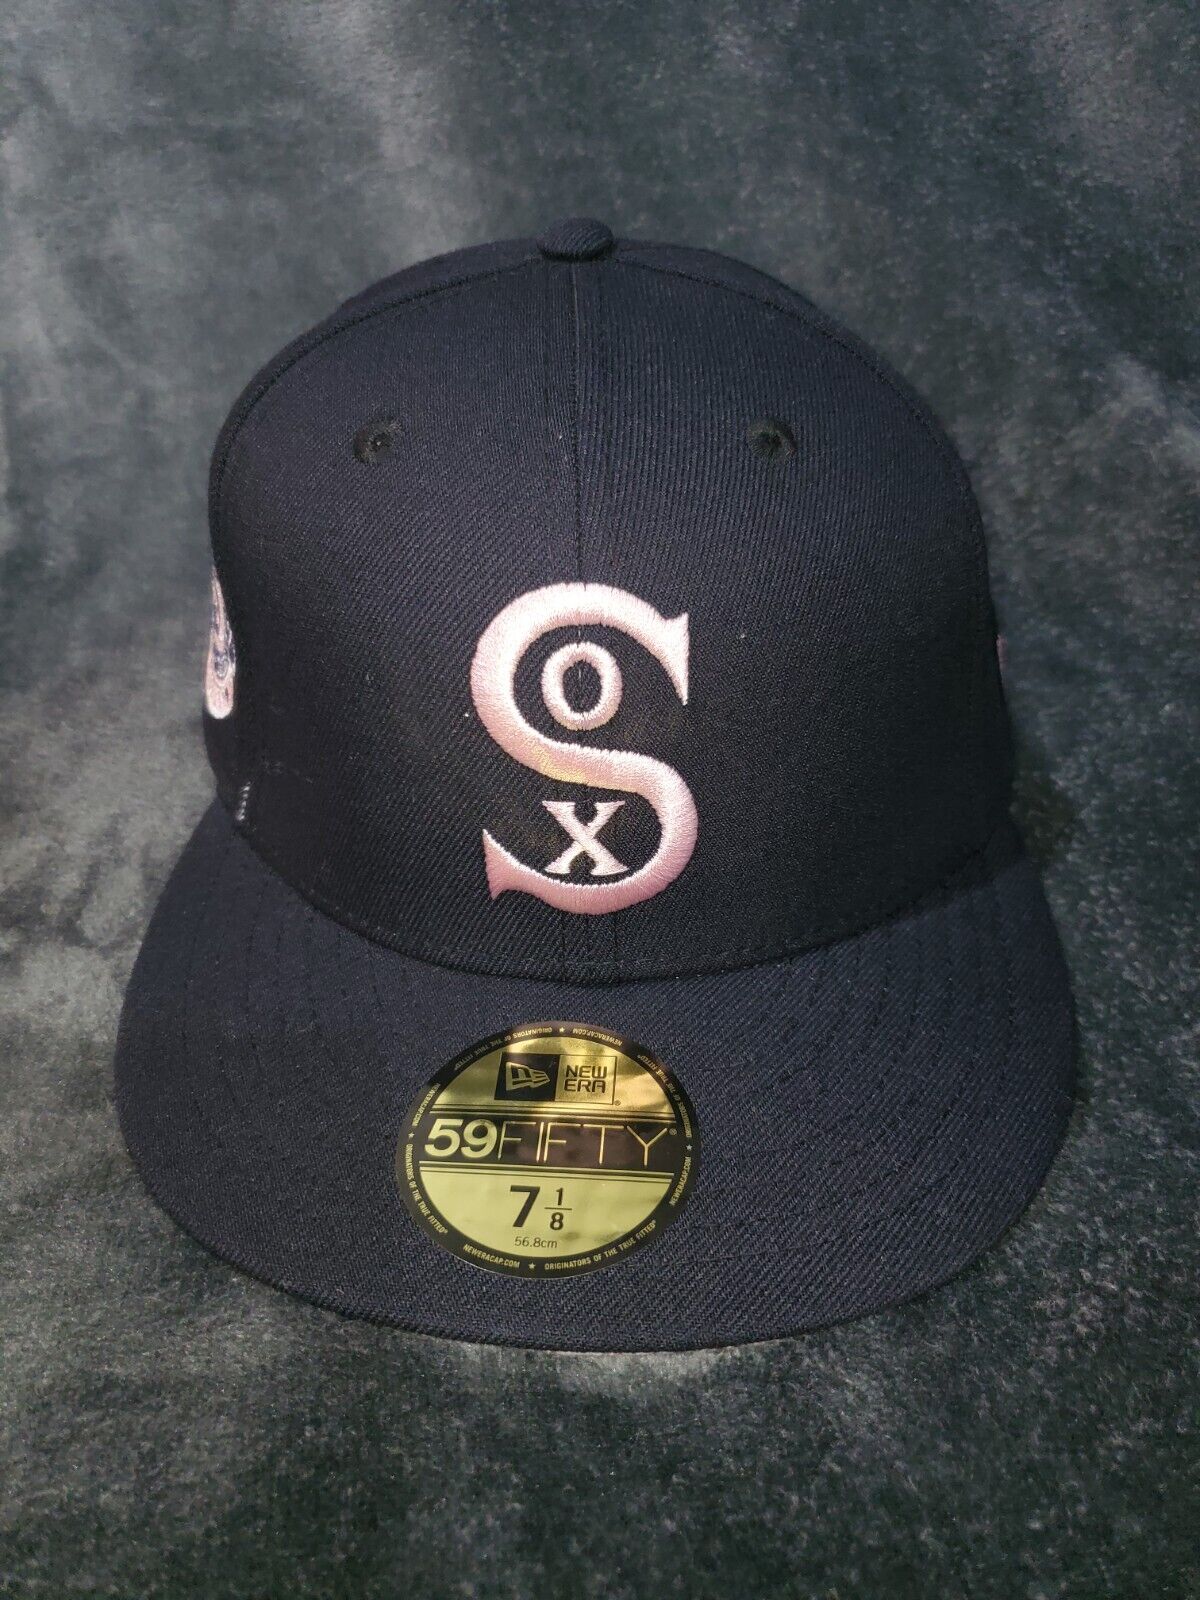 NEW ERA 59 FIFTY CHICAGO WHITE SOX 1917 WORLD SERIES PATCH BLUE FITTED HAT 7 1/8